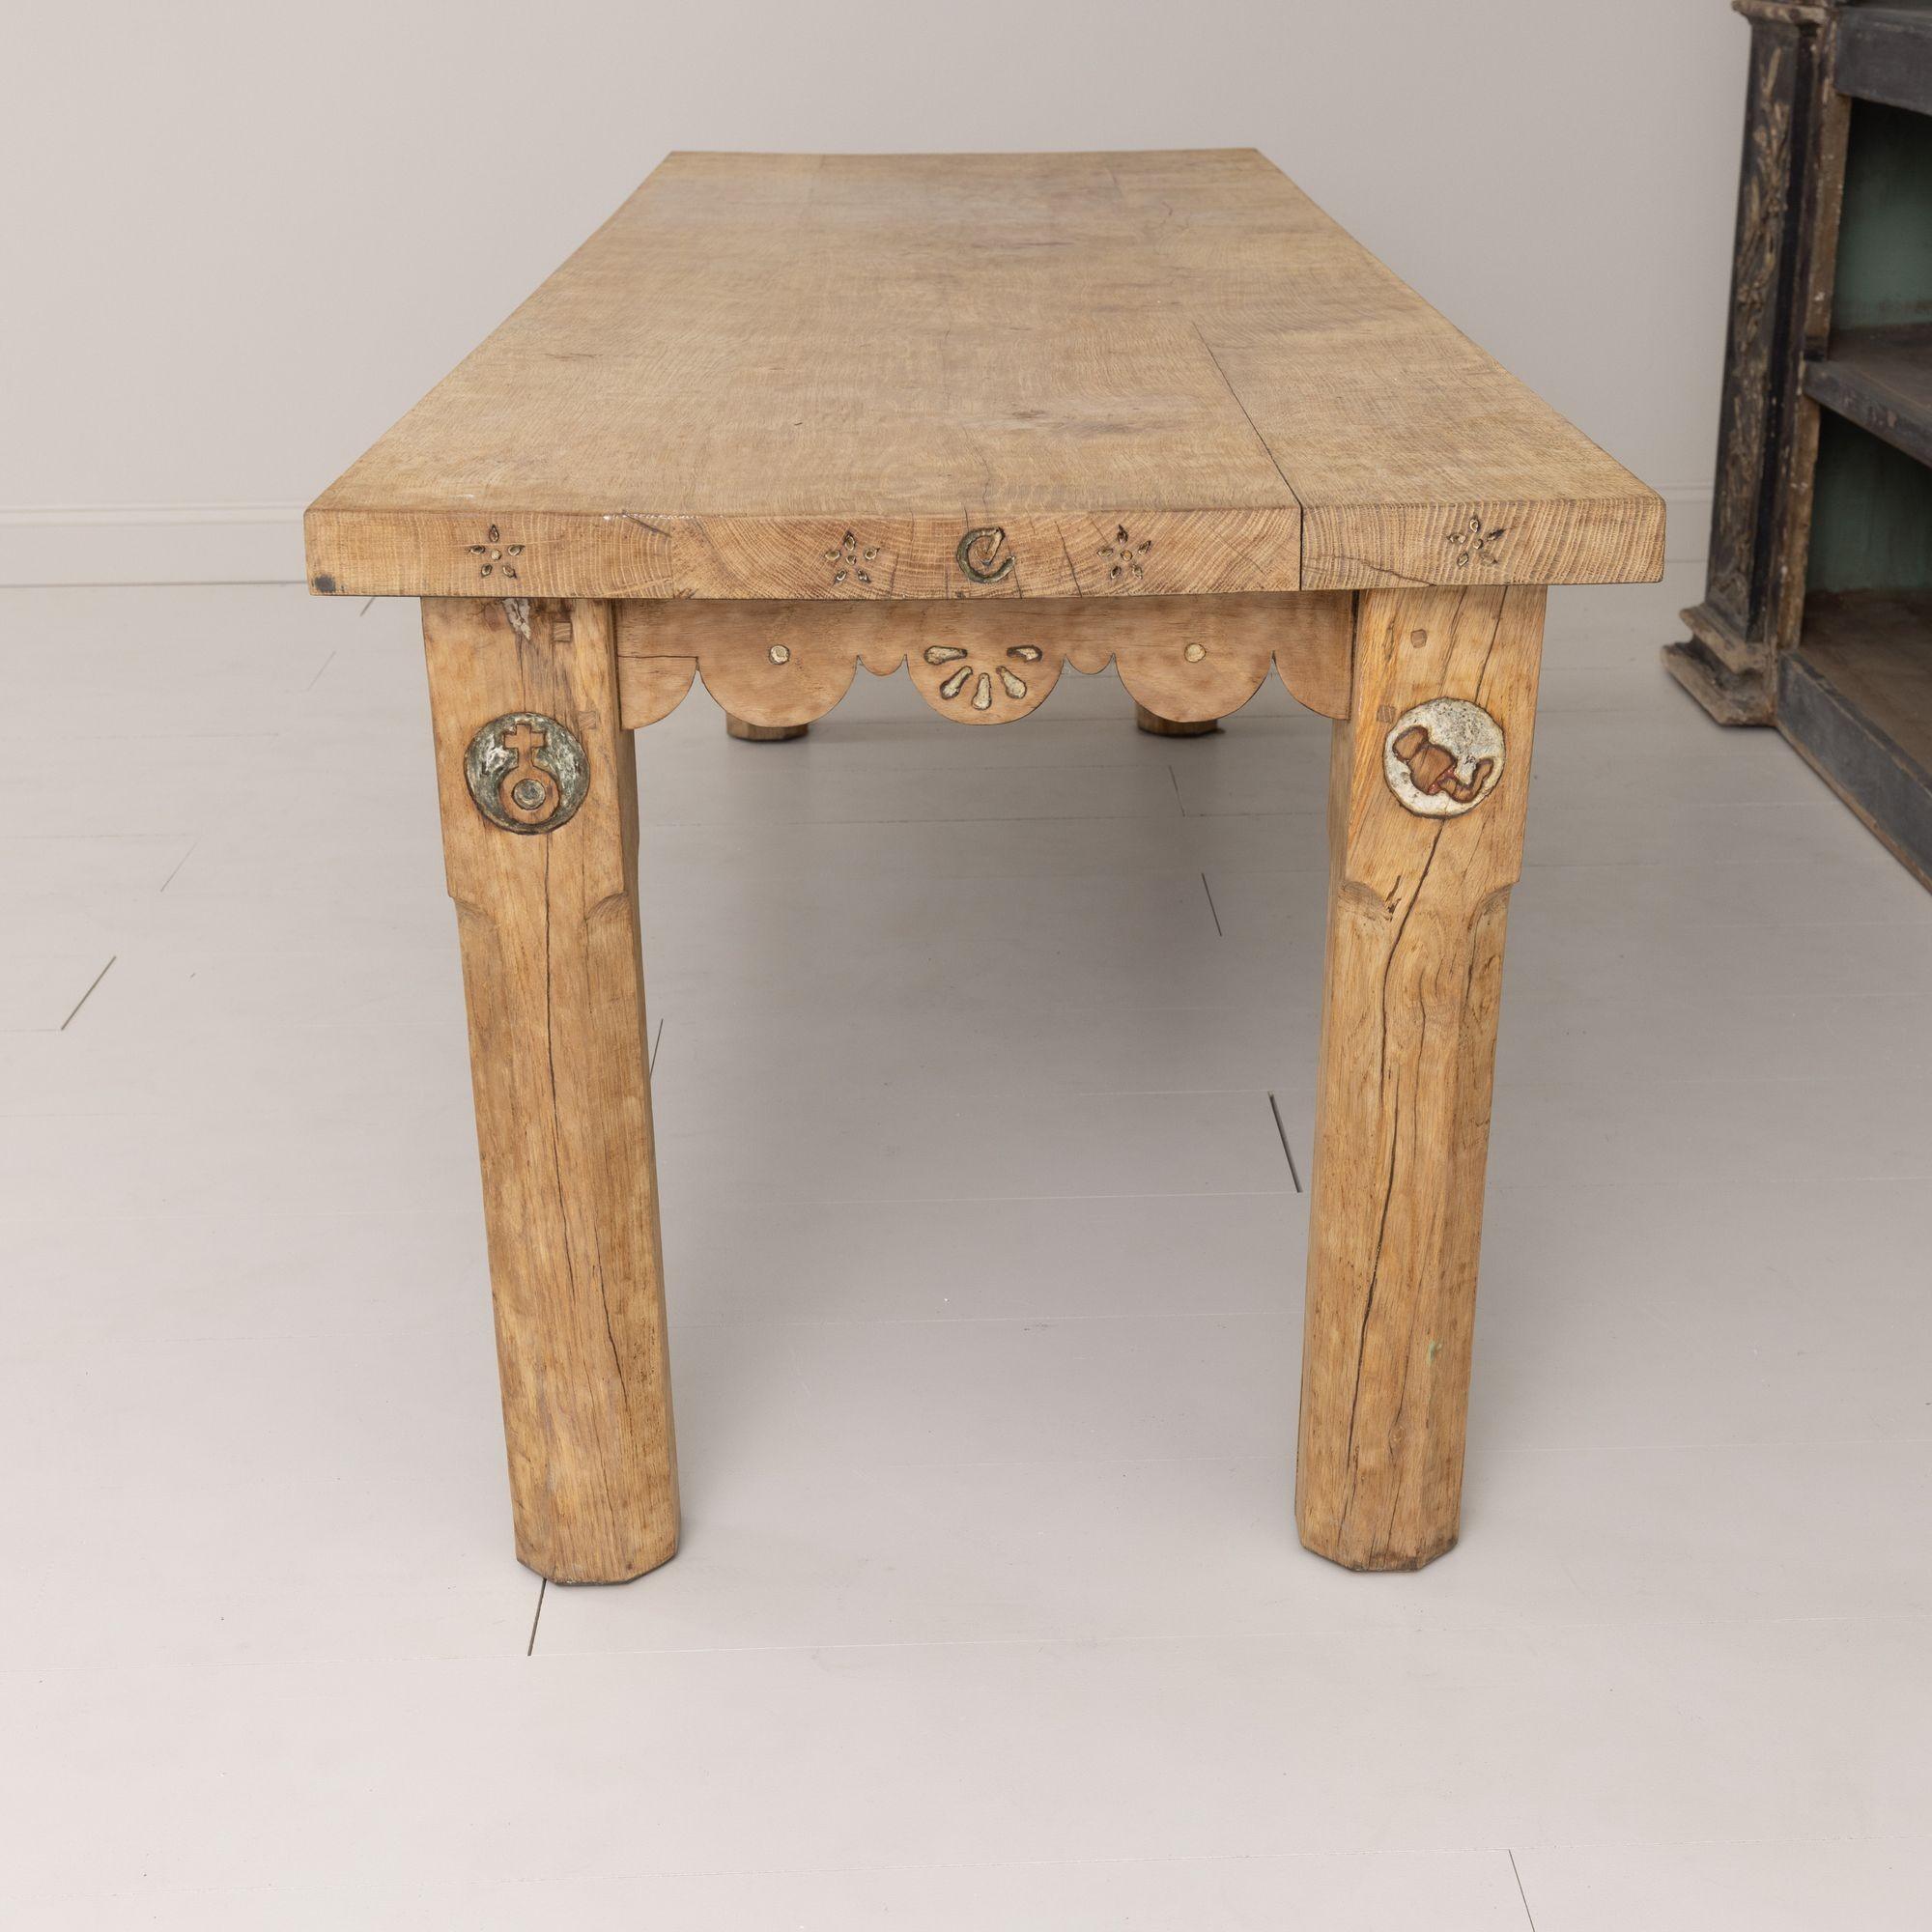 19th Century 19th c. French Oak Farm Table with Scalloped Apron and Latin Carvings